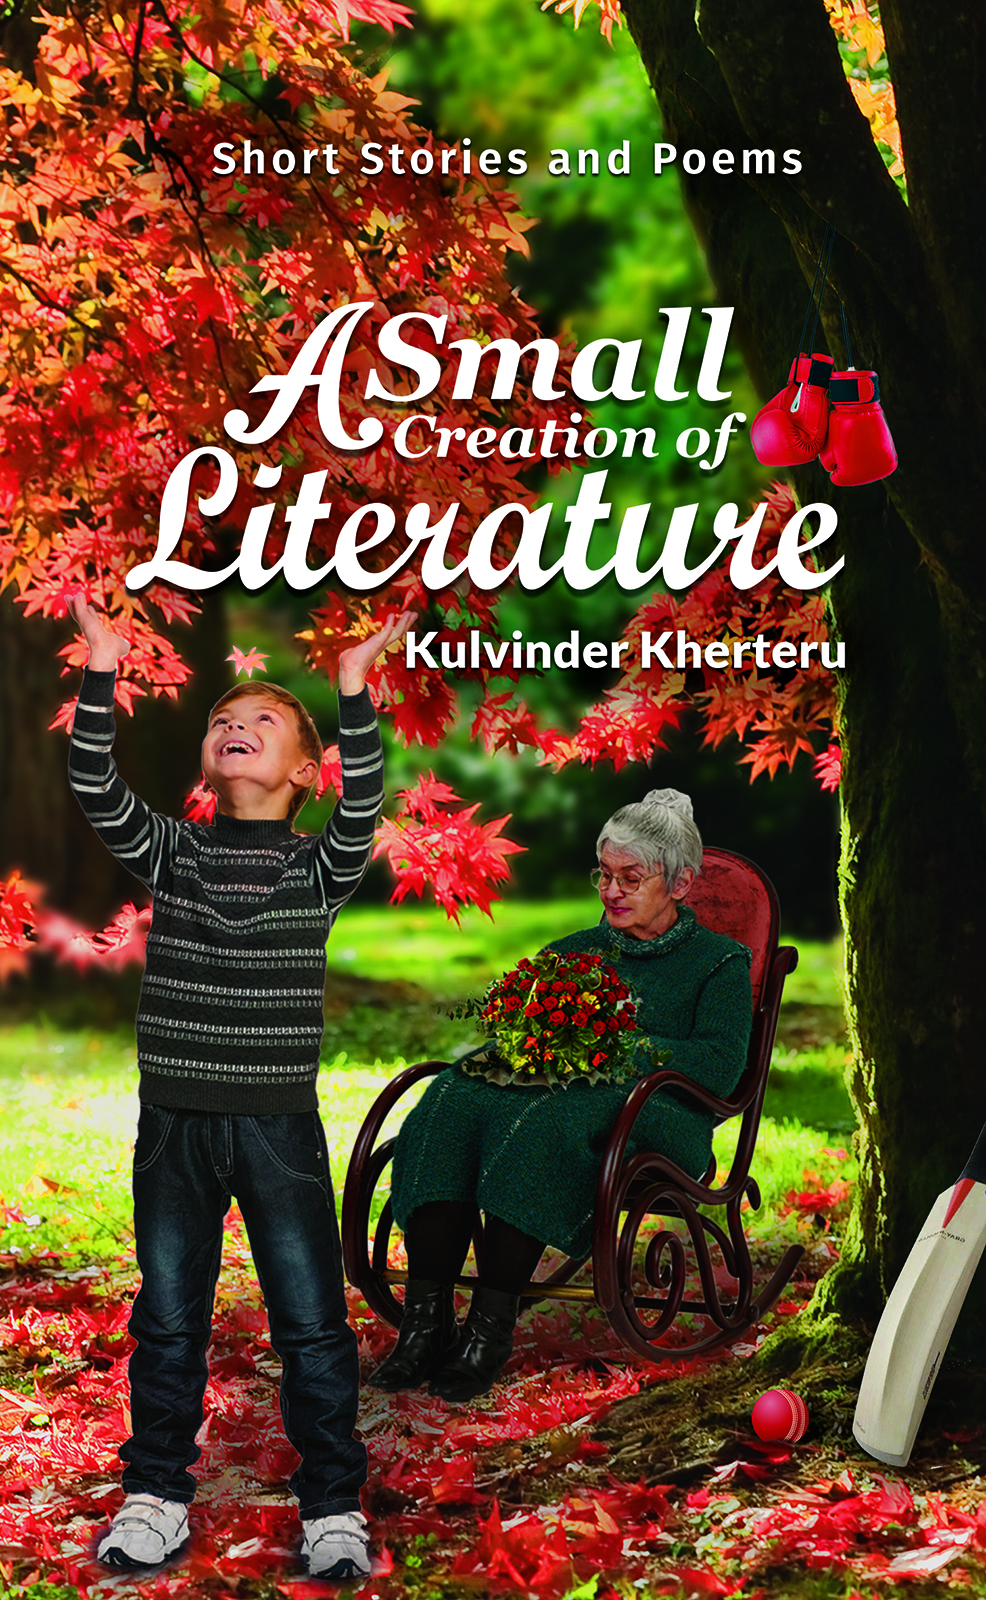 This image is the cover for the book A Small Creation of Literature